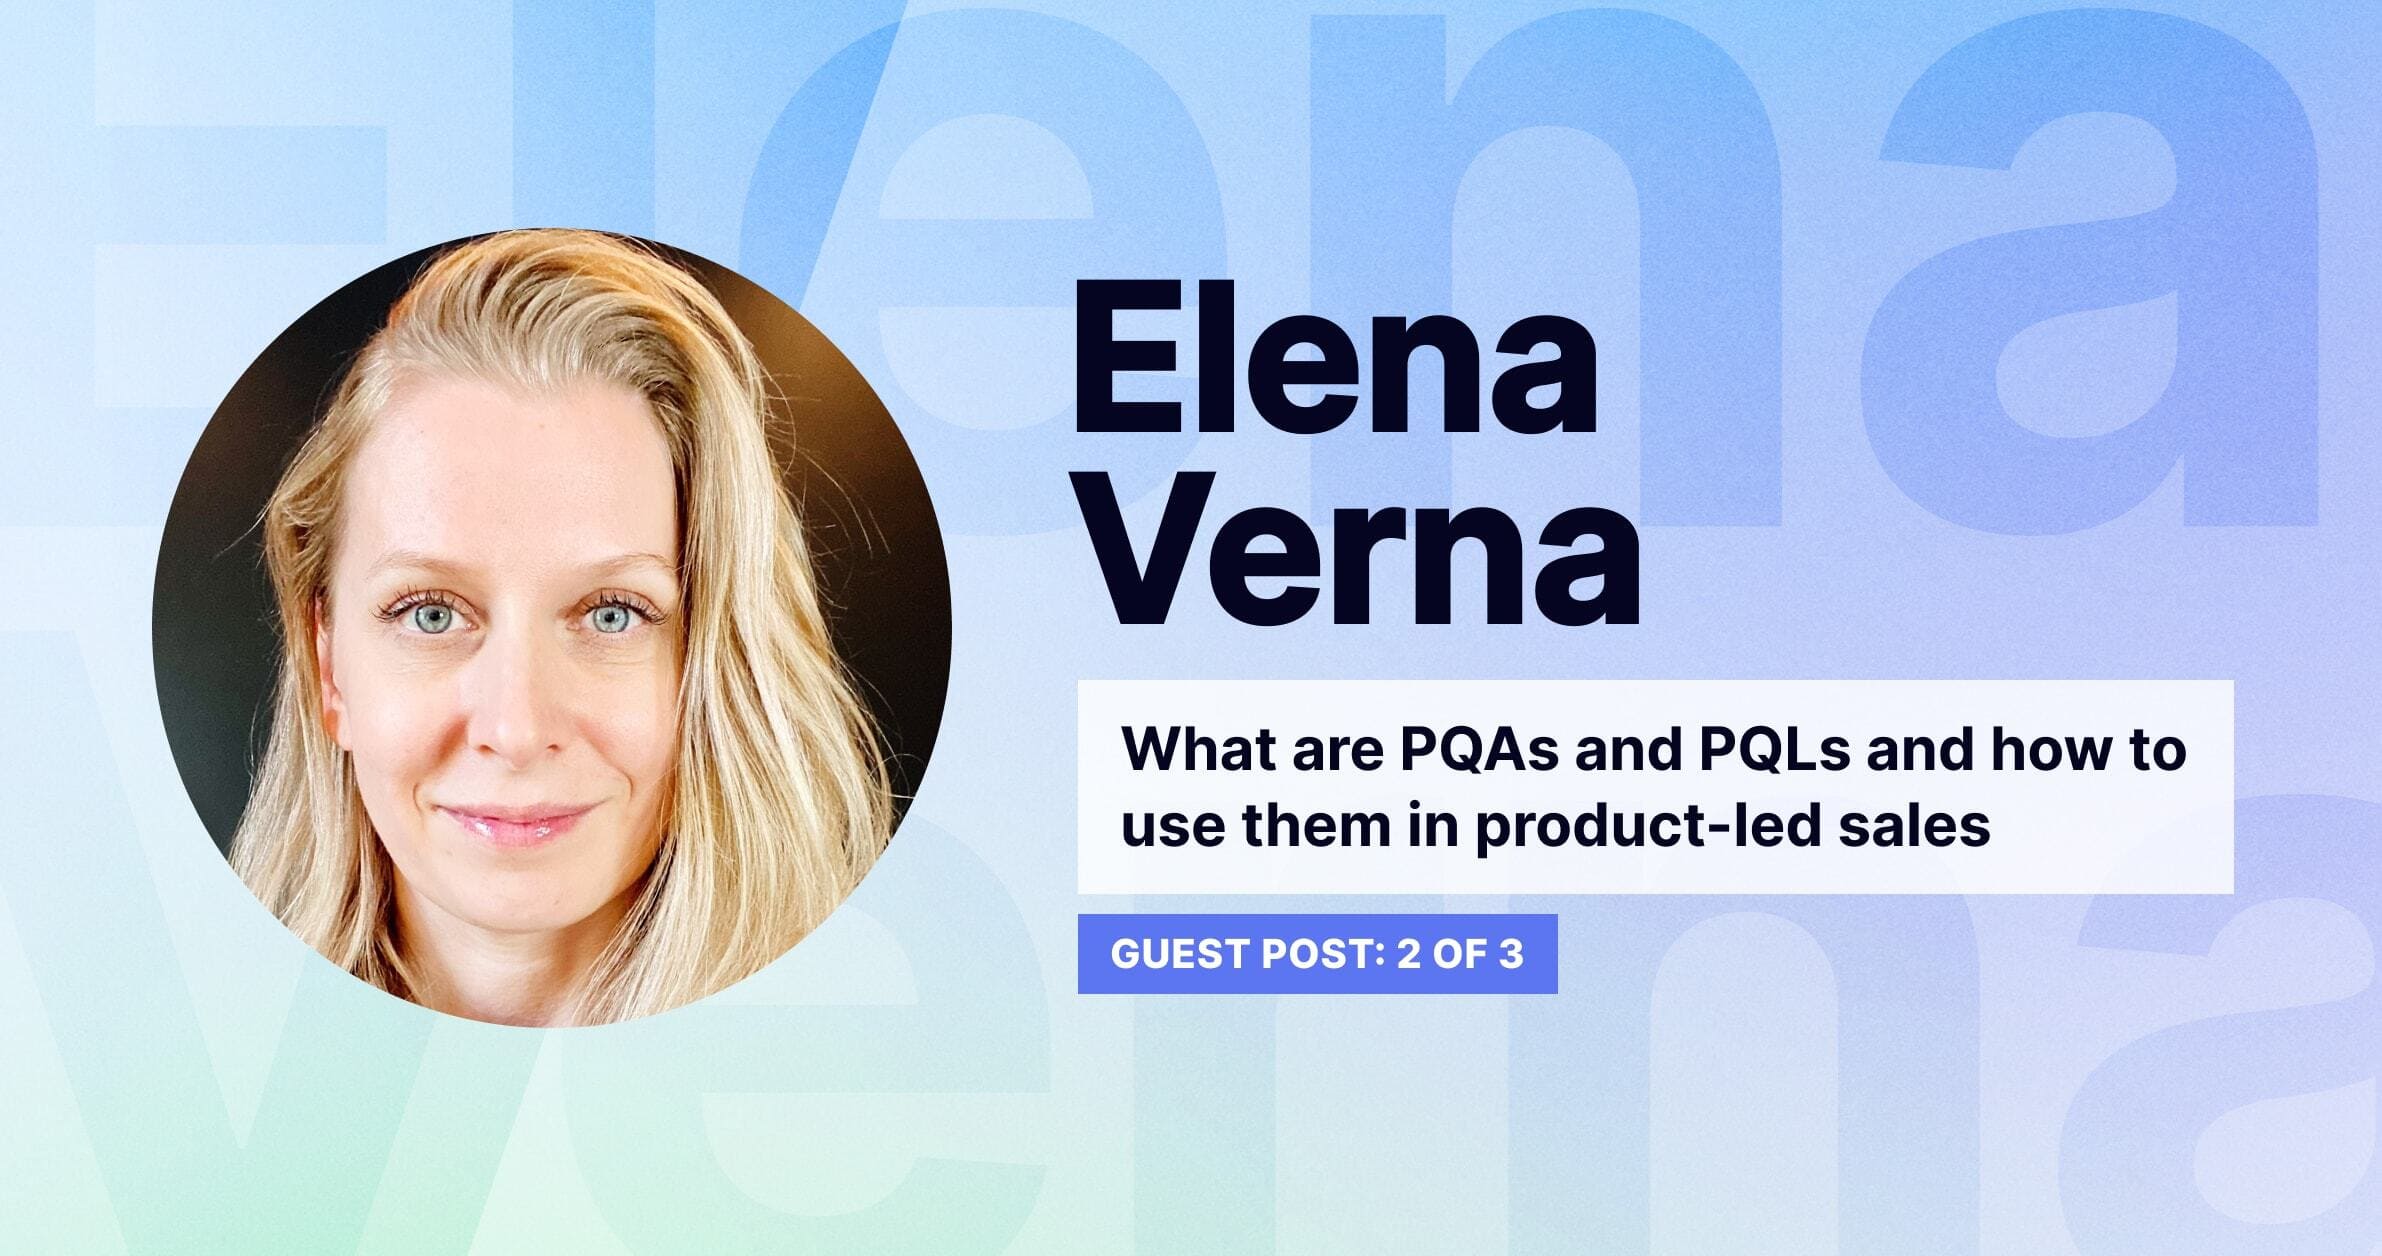 What are PQAs and PQLs and how to use them in product-led sales main image